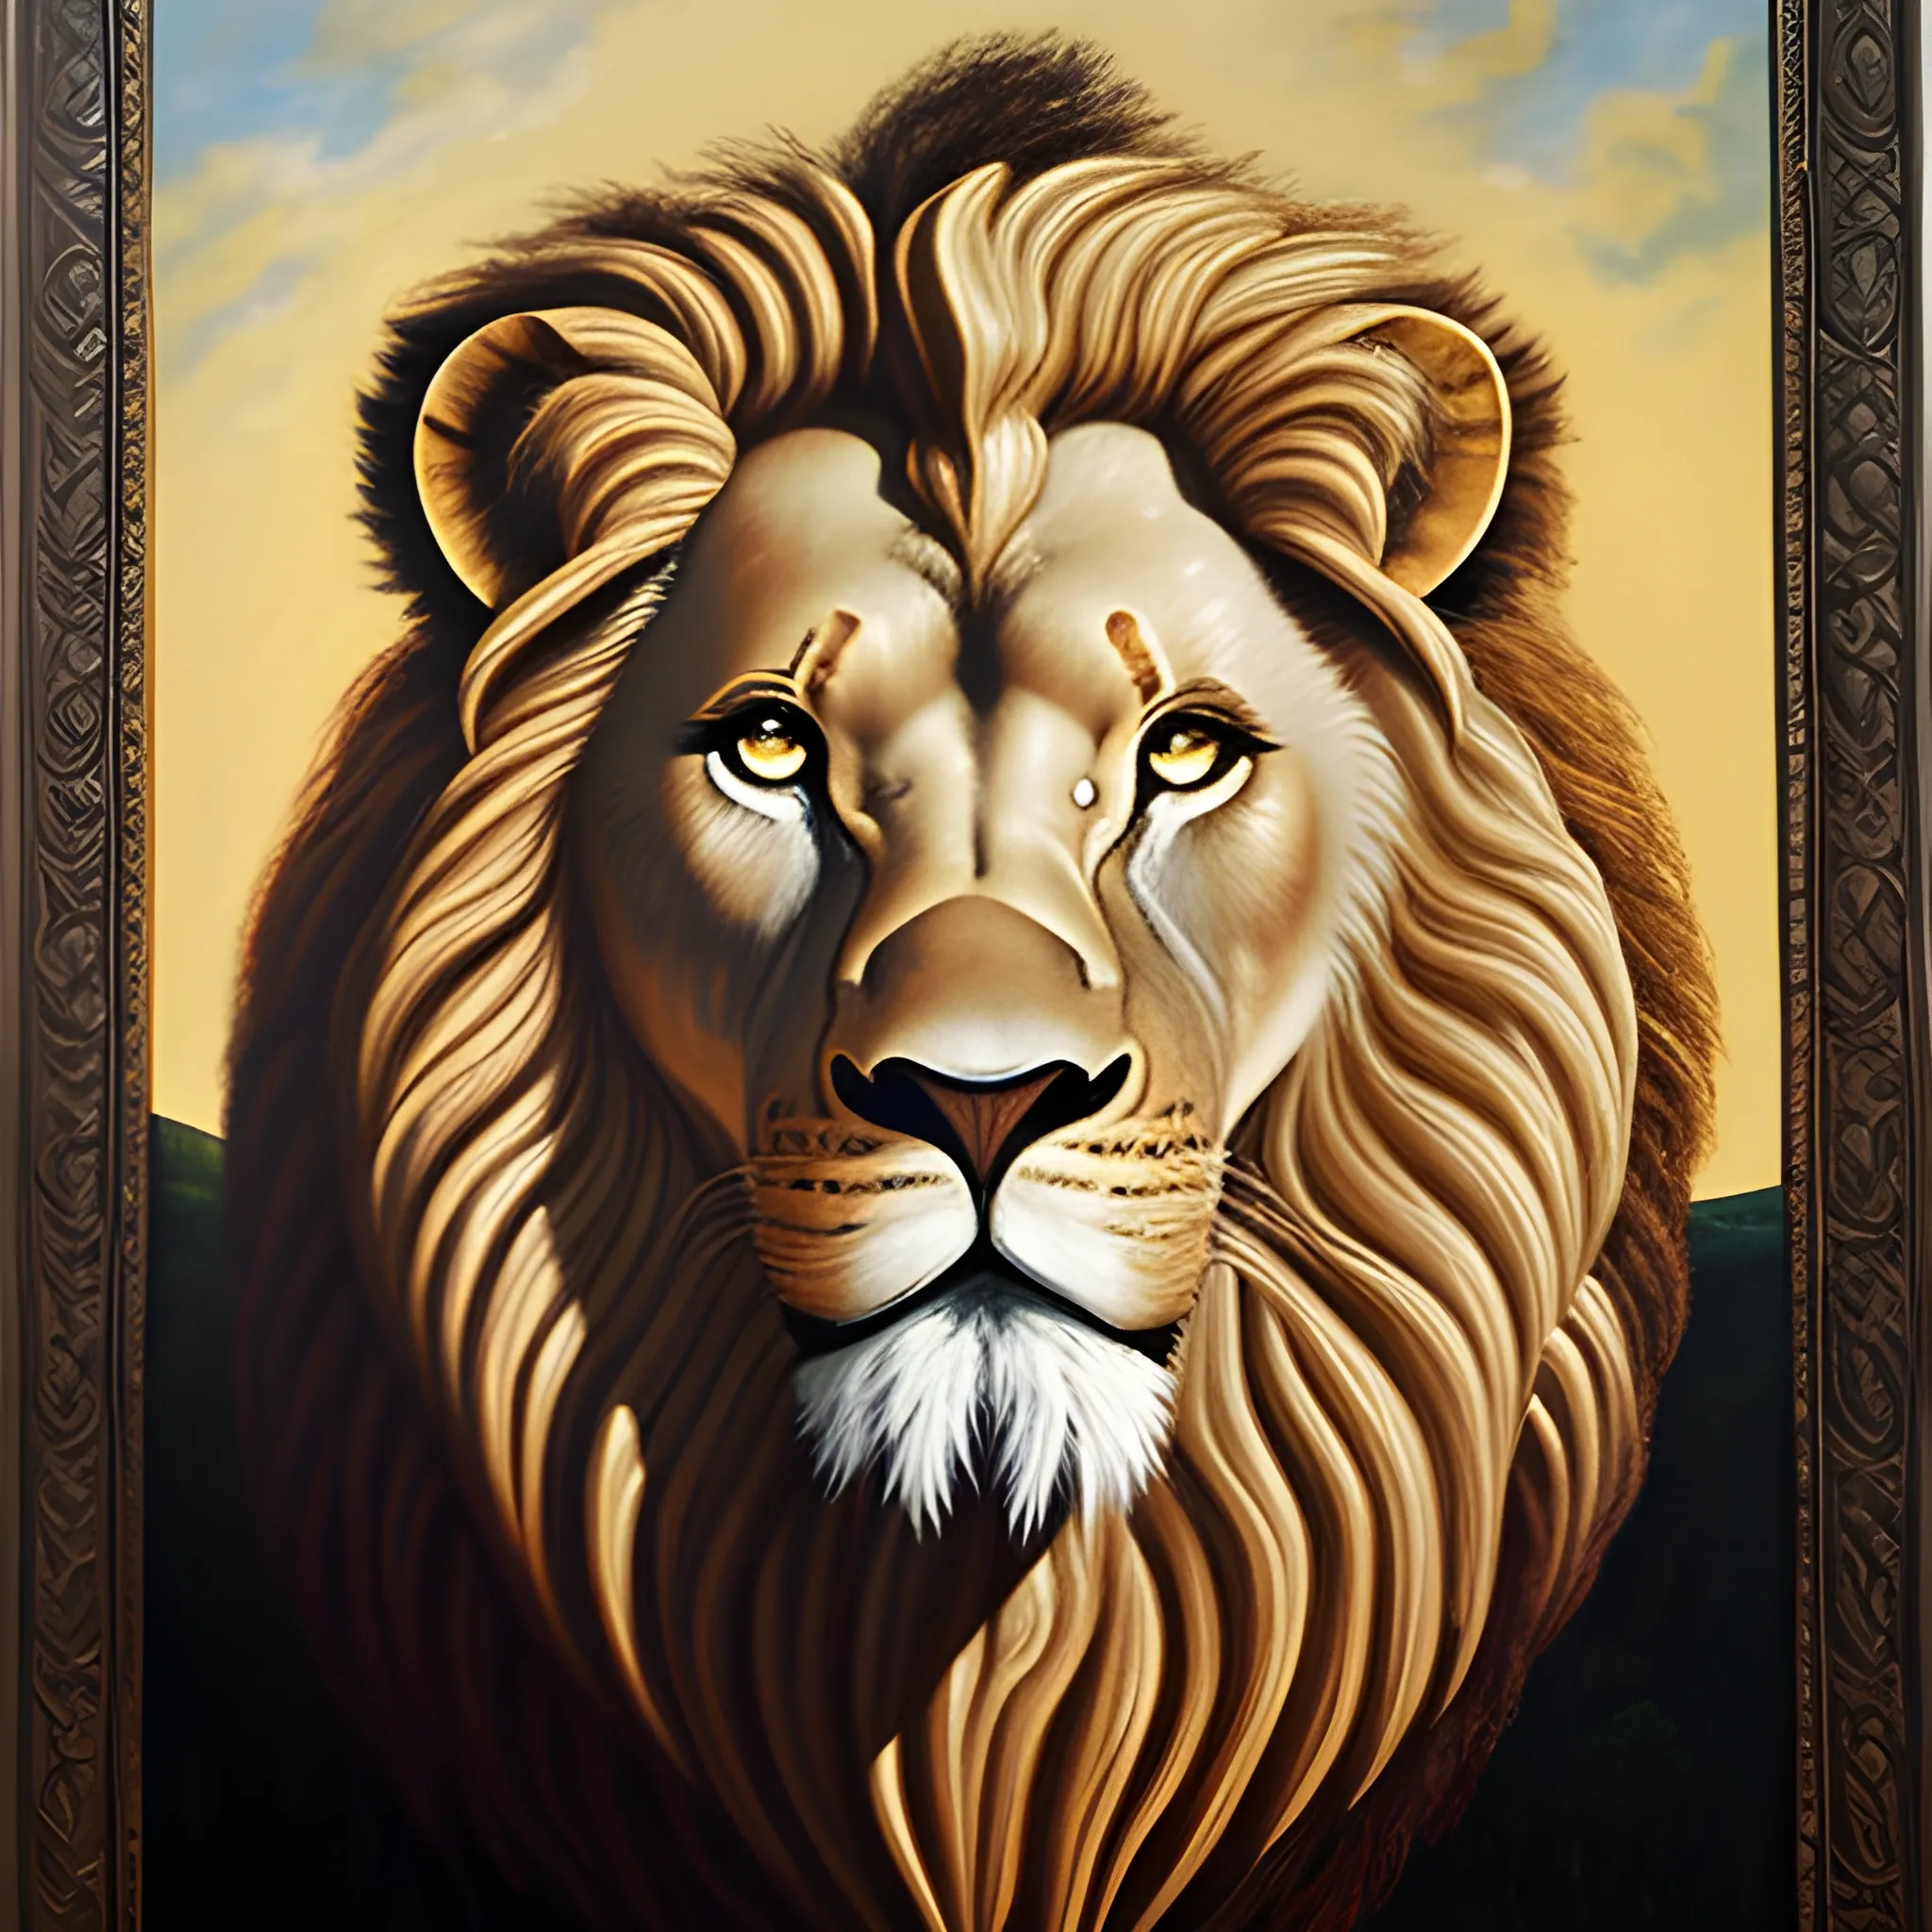 Lion Aslan from The Chronicles of Narnia by C. S. Lewis. Original oil painting on black velvet by E. Felix. f121